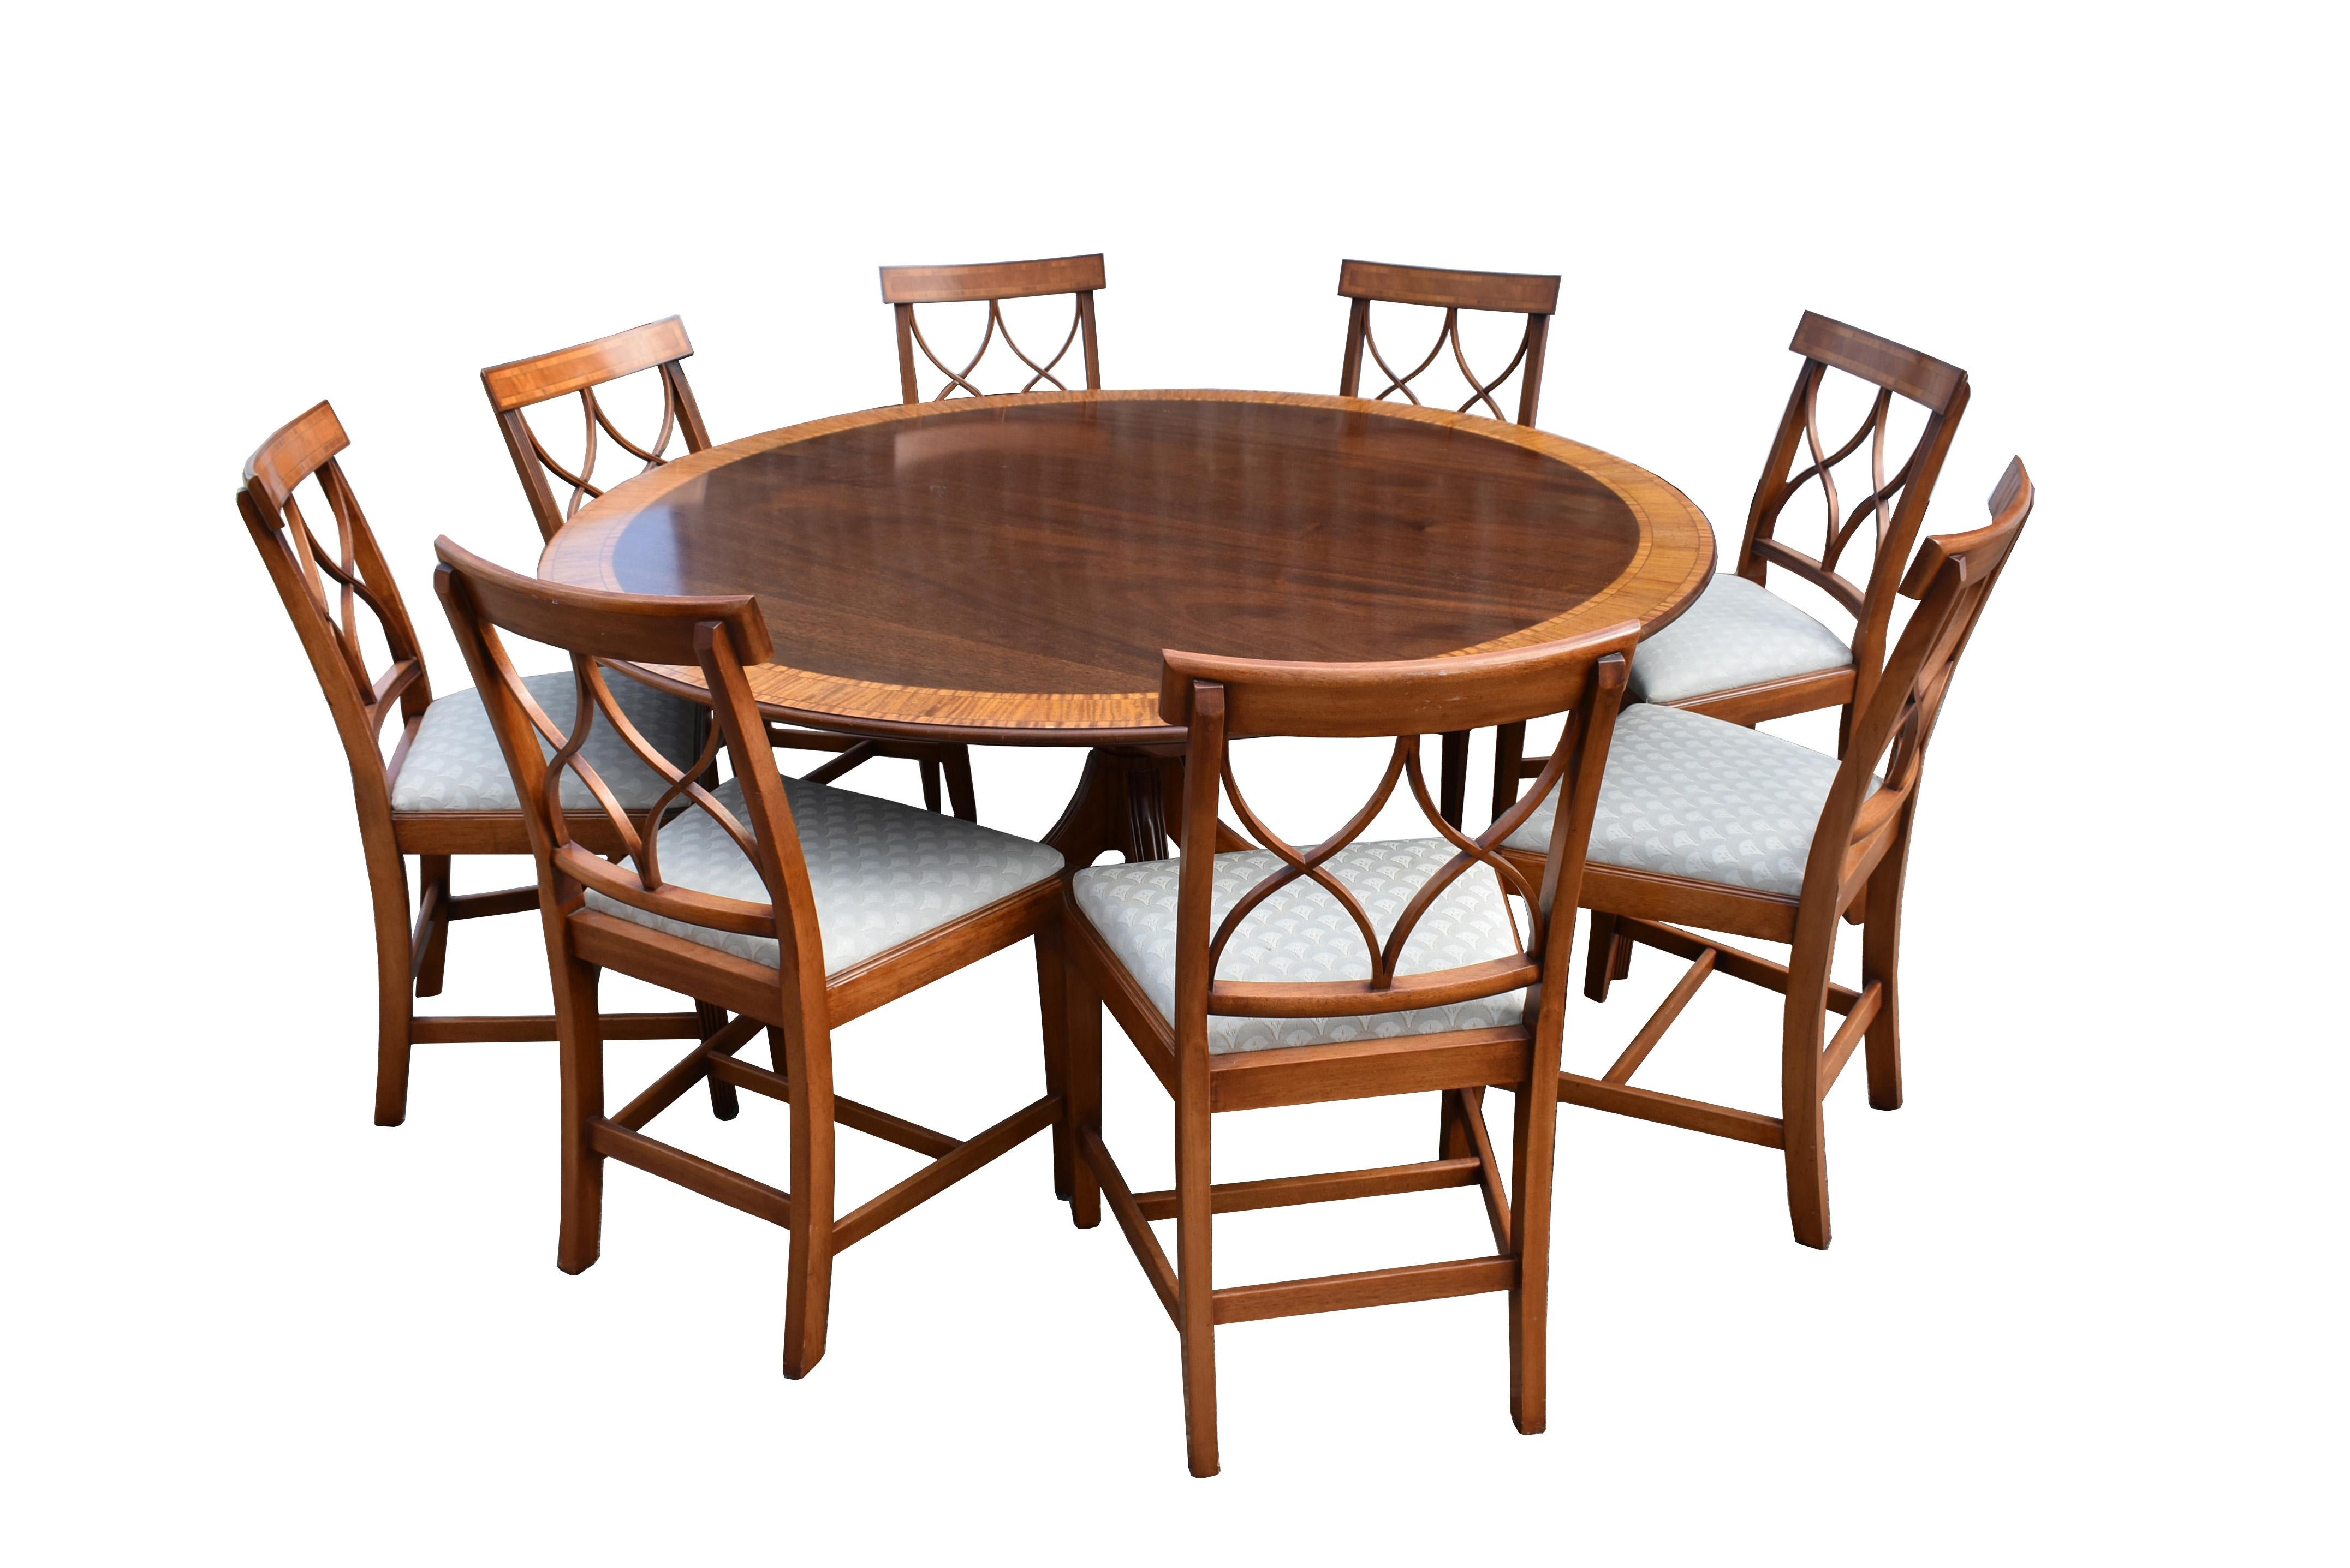 For sale is a very good quality circular dining table made in the Georgian taste by William Tillman. The round top has a banded edge with nicely figured mahogany to the centre, standing on a pedestal base, terminating on four splayed legs and